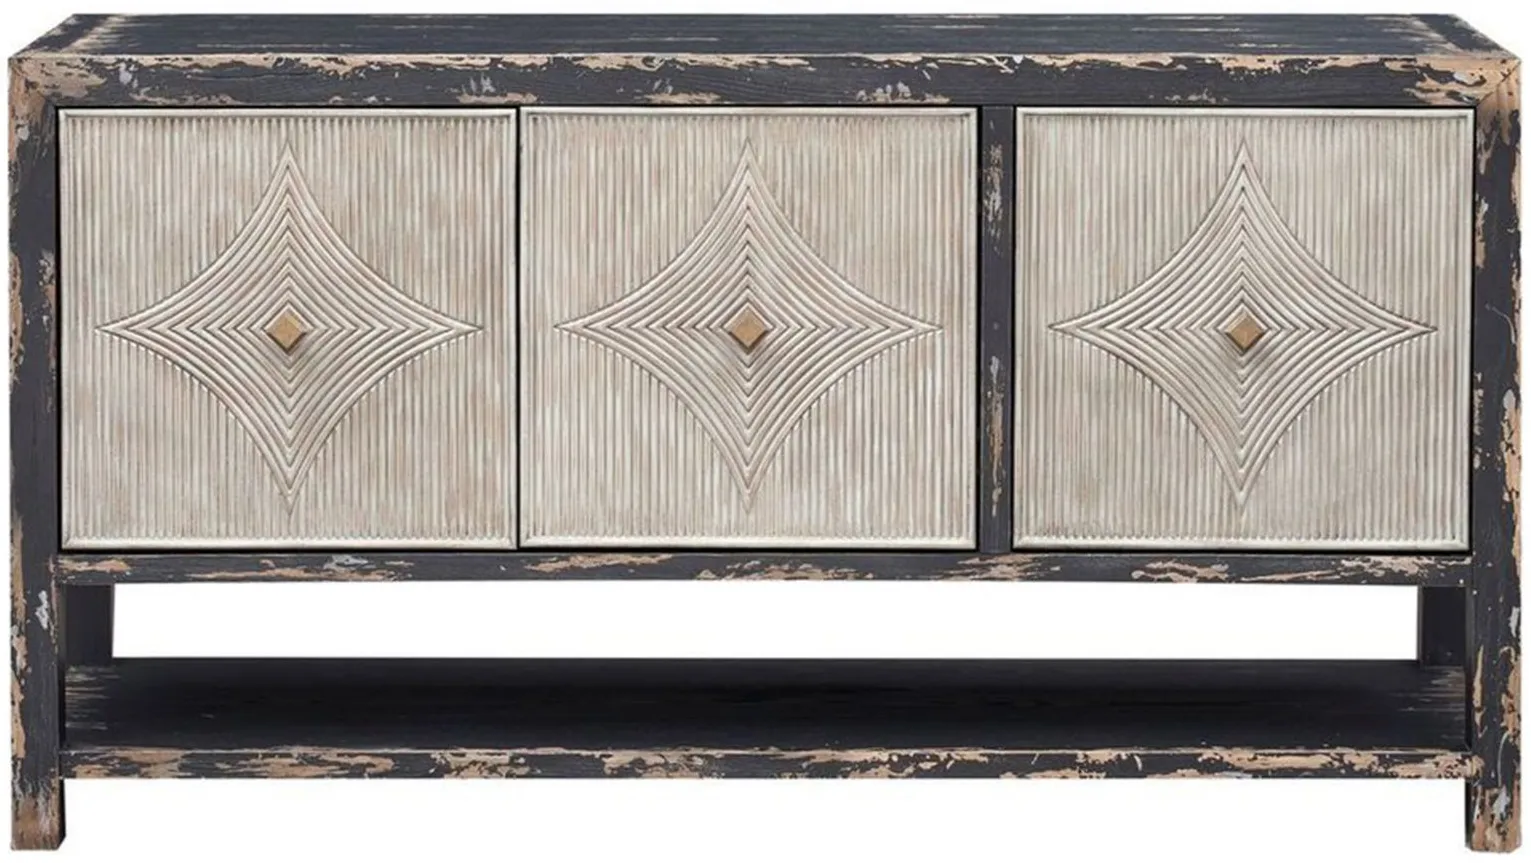 Wonder Chest in Distressed Black by Coast To Coast Imports